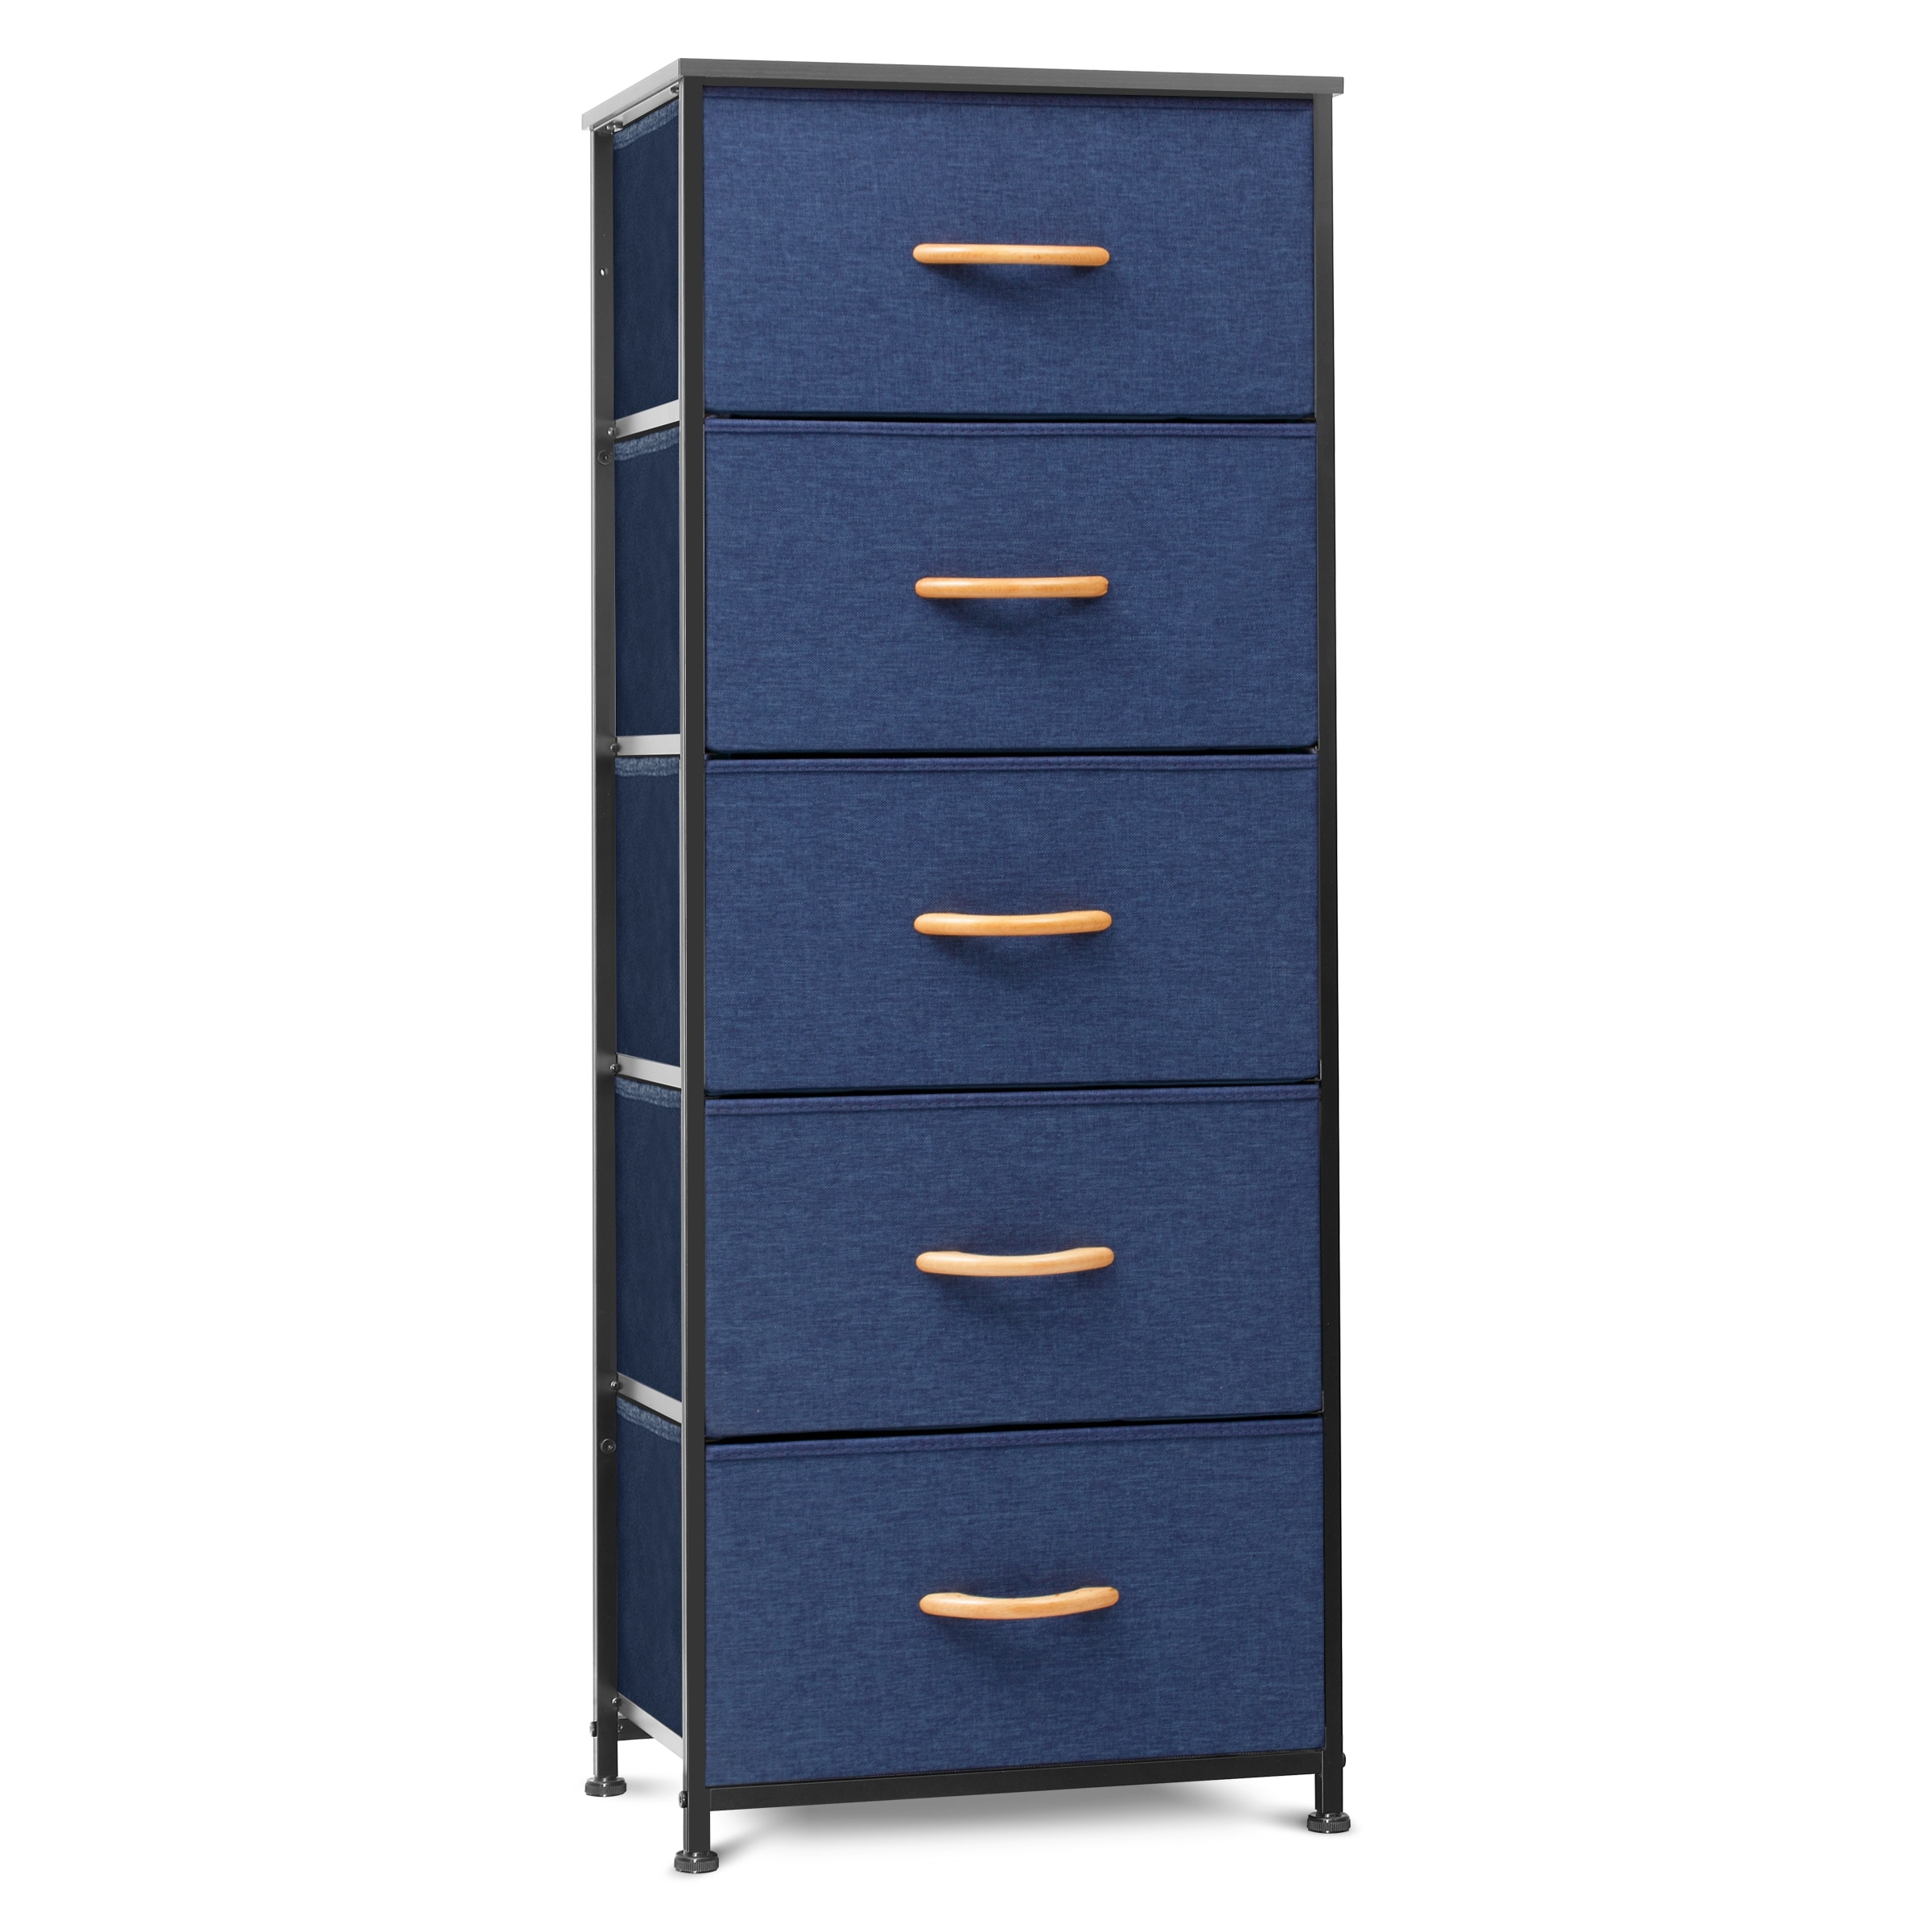 https://ak1.ostkcdn.com/images/products/is/images/direct/37e708e165568bdcf9d3d1f08acda84fdea878f5/VredHom-5-Drawers-Vertical-Dresser-Storage-Tower.jpg